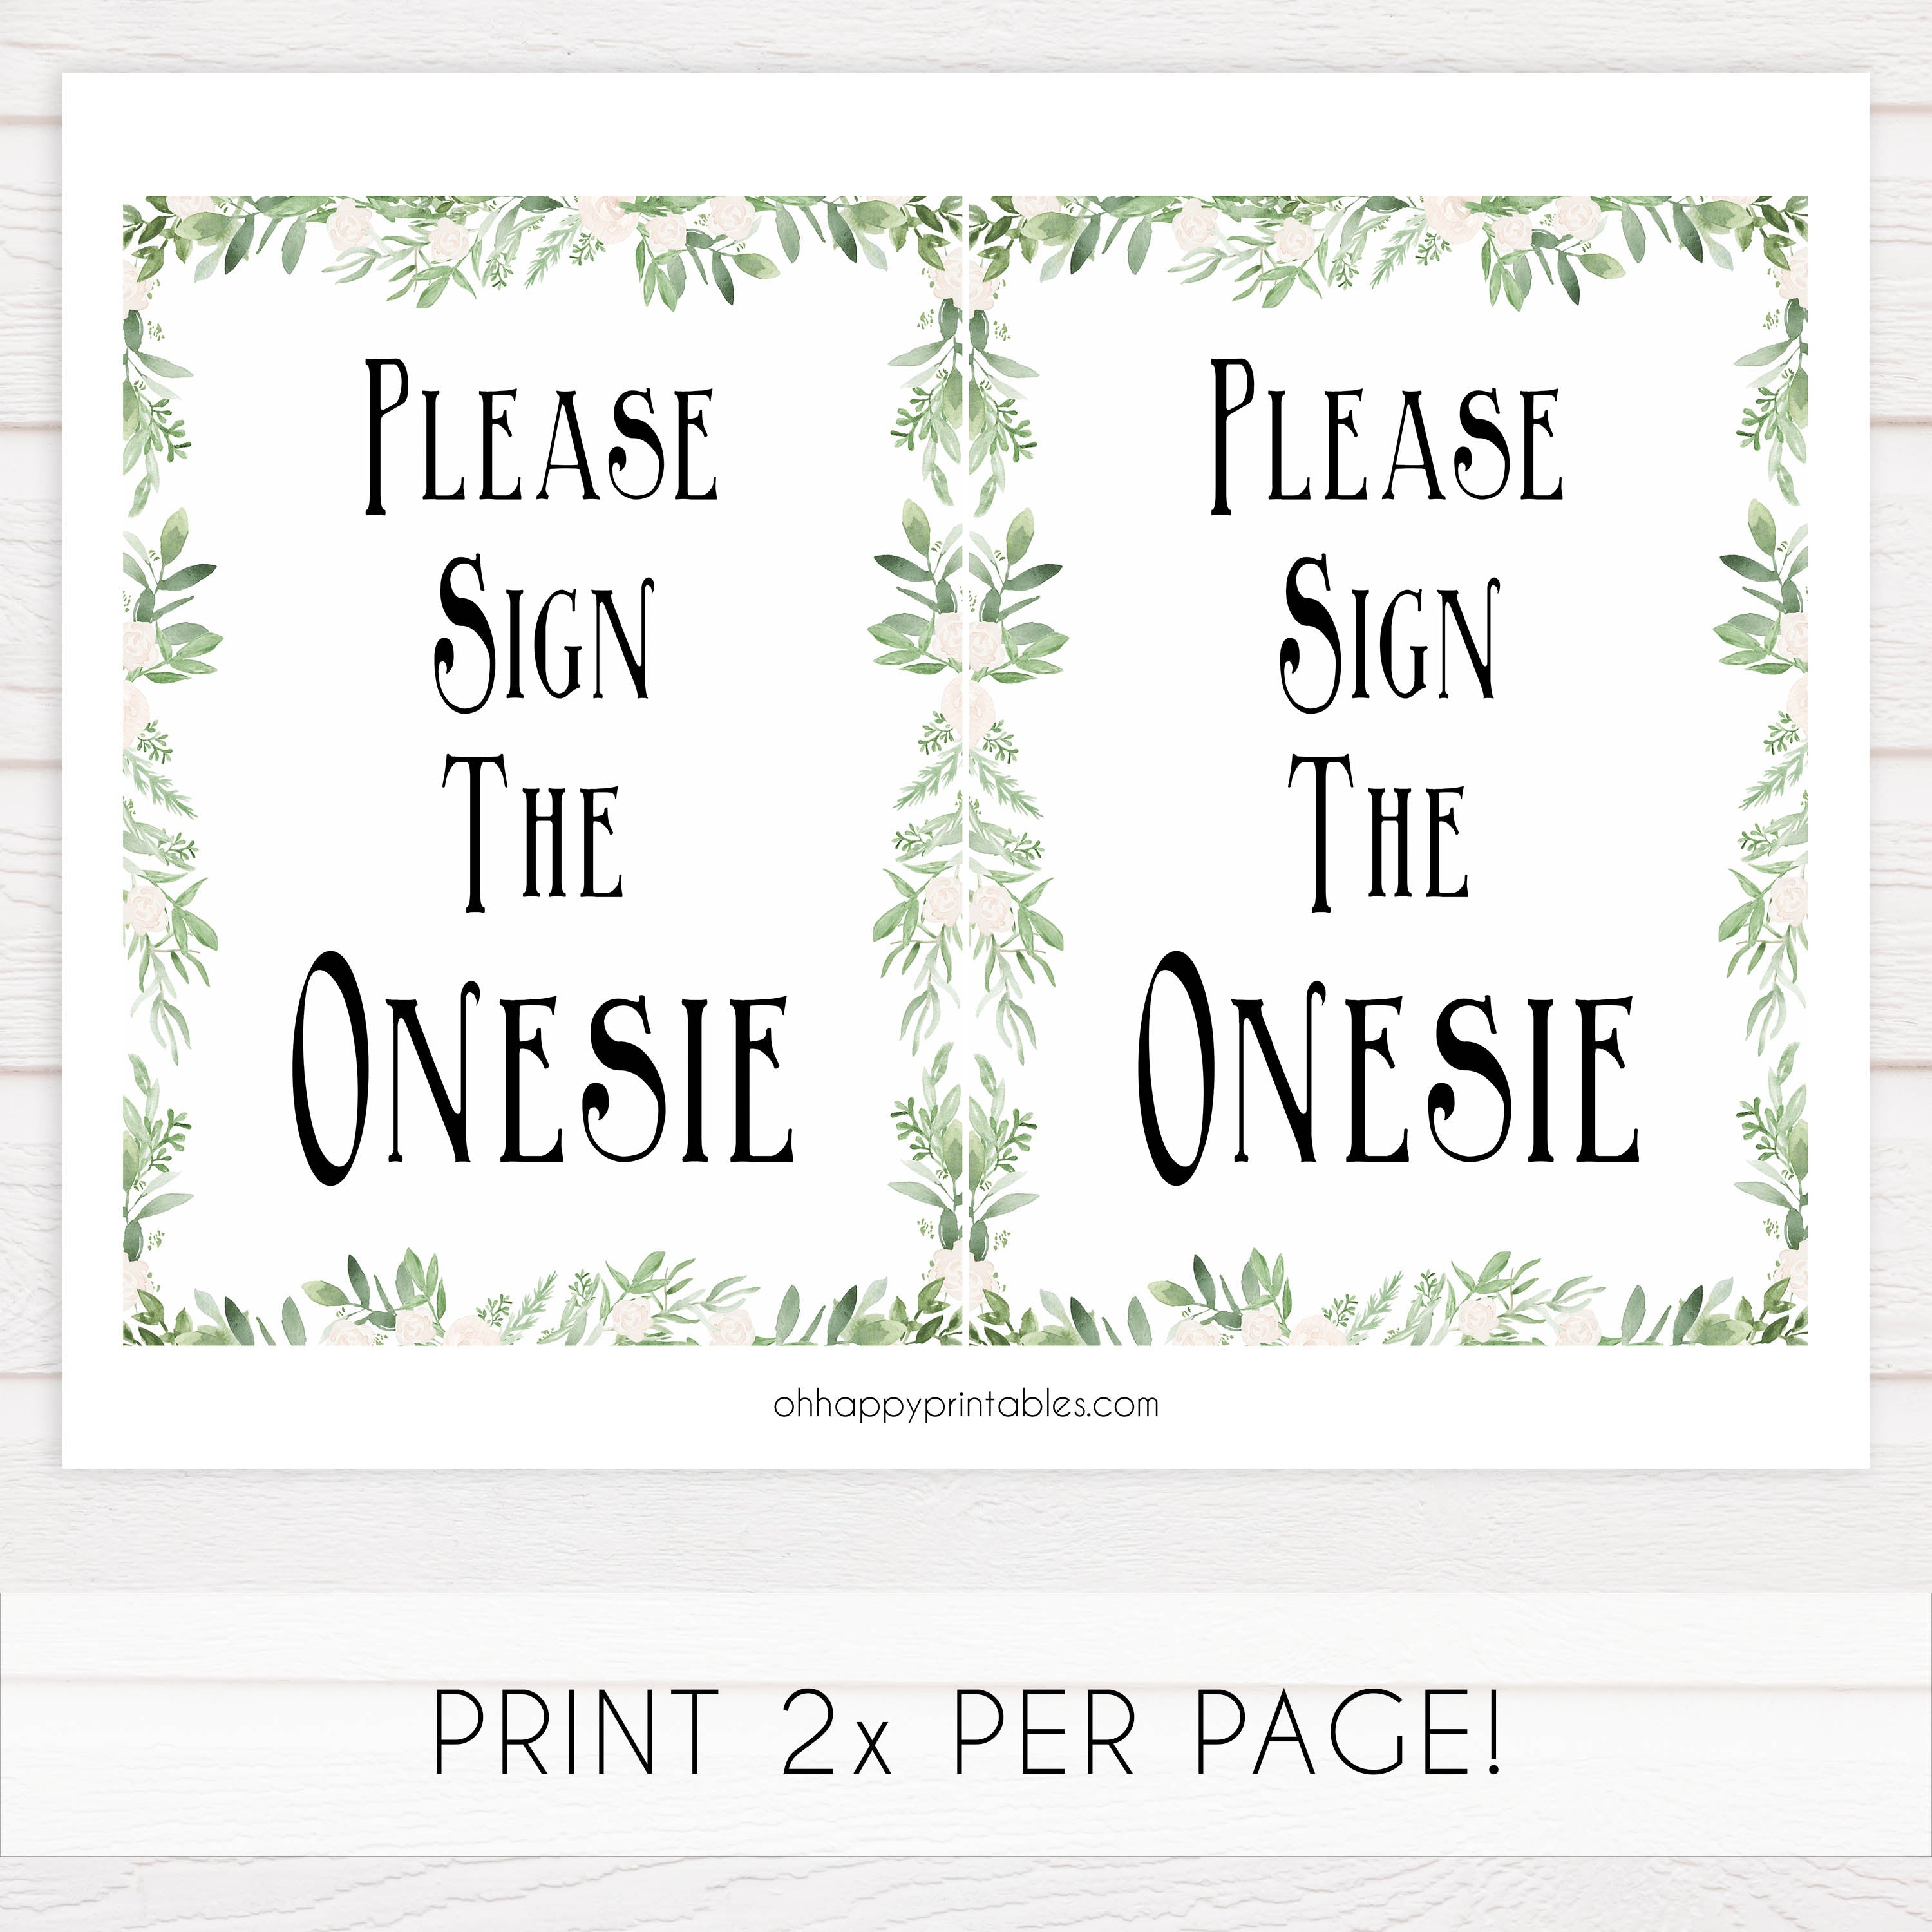 Please sign the onesie sign, Printable baby shower games, greenery baby shower games, fun floral baby games, botanical baby shower games,